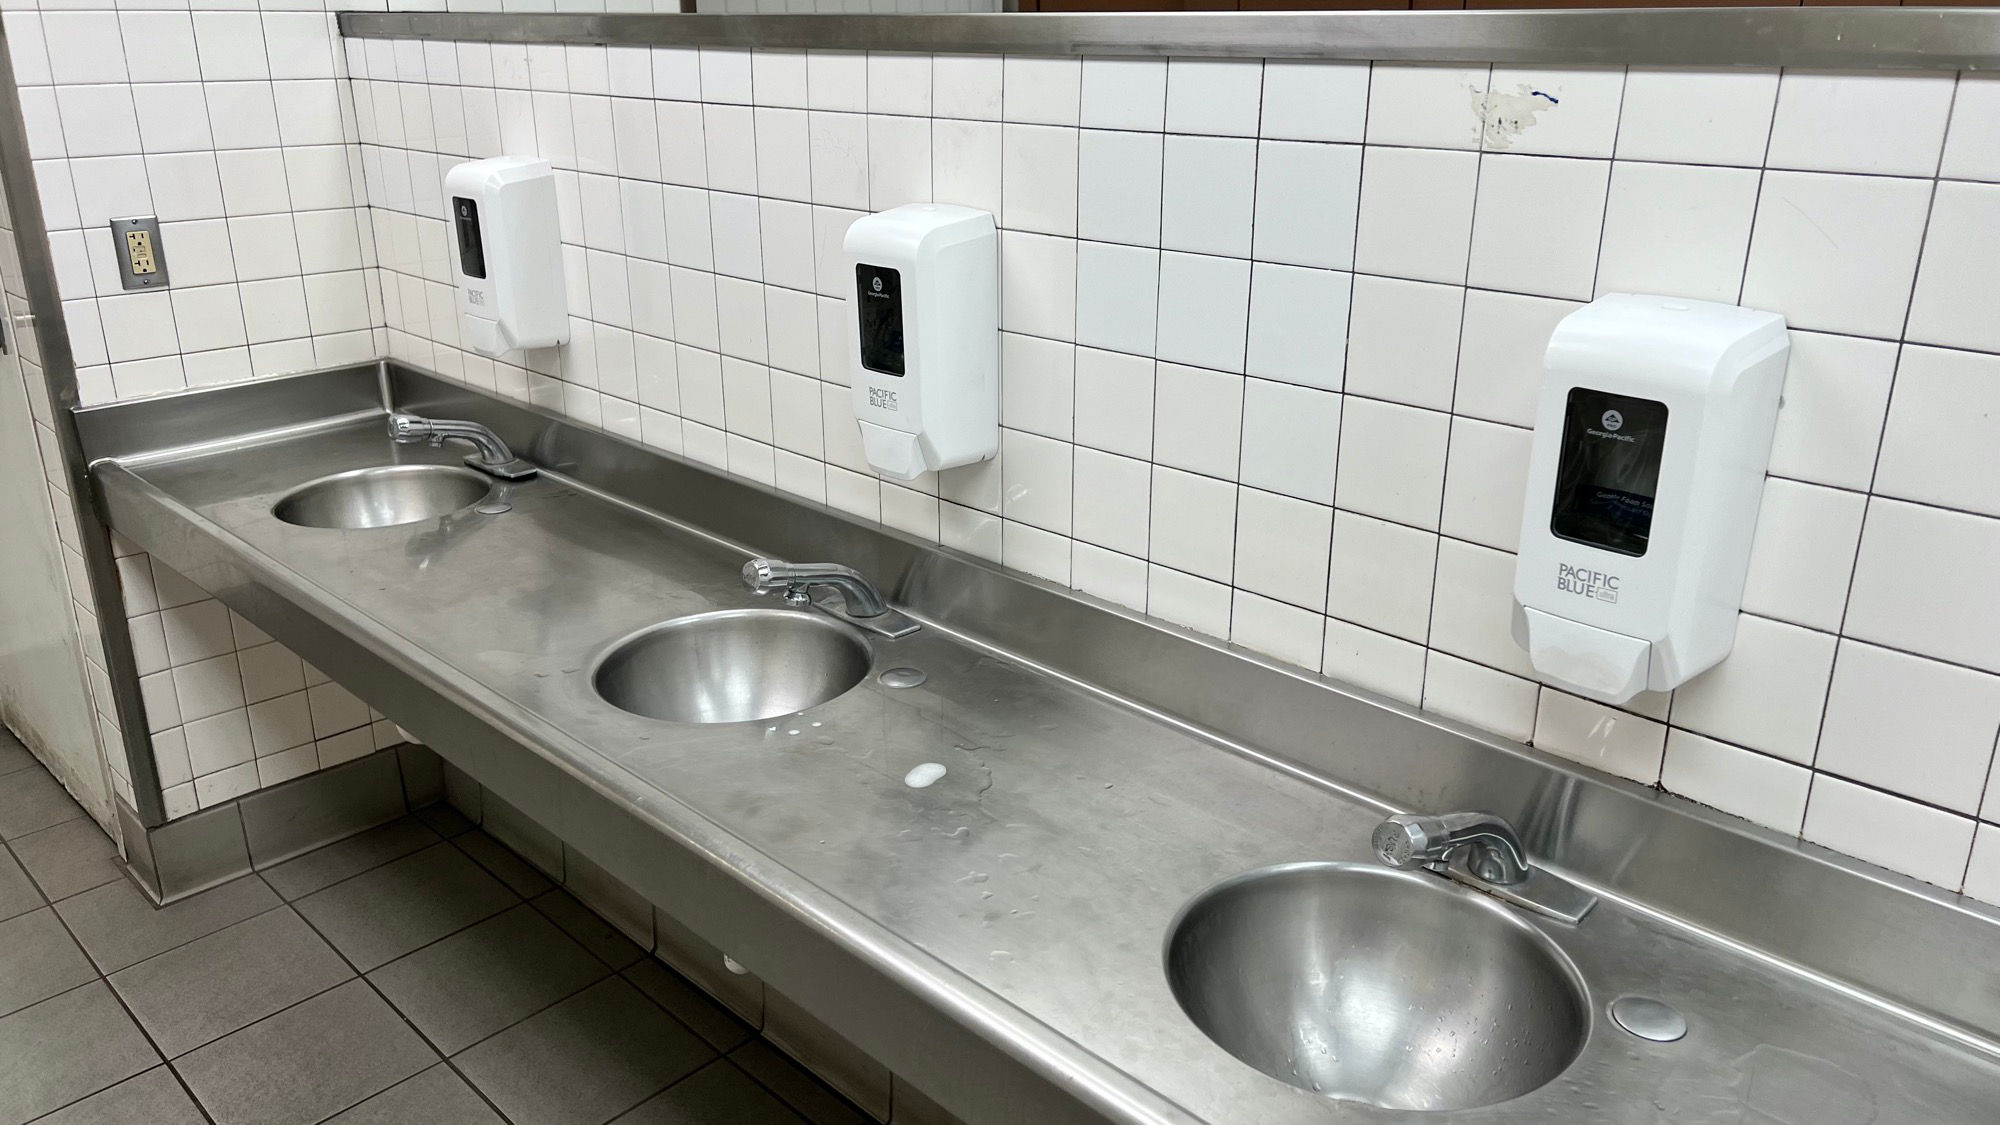 Timber Mountain Restroom Sinks